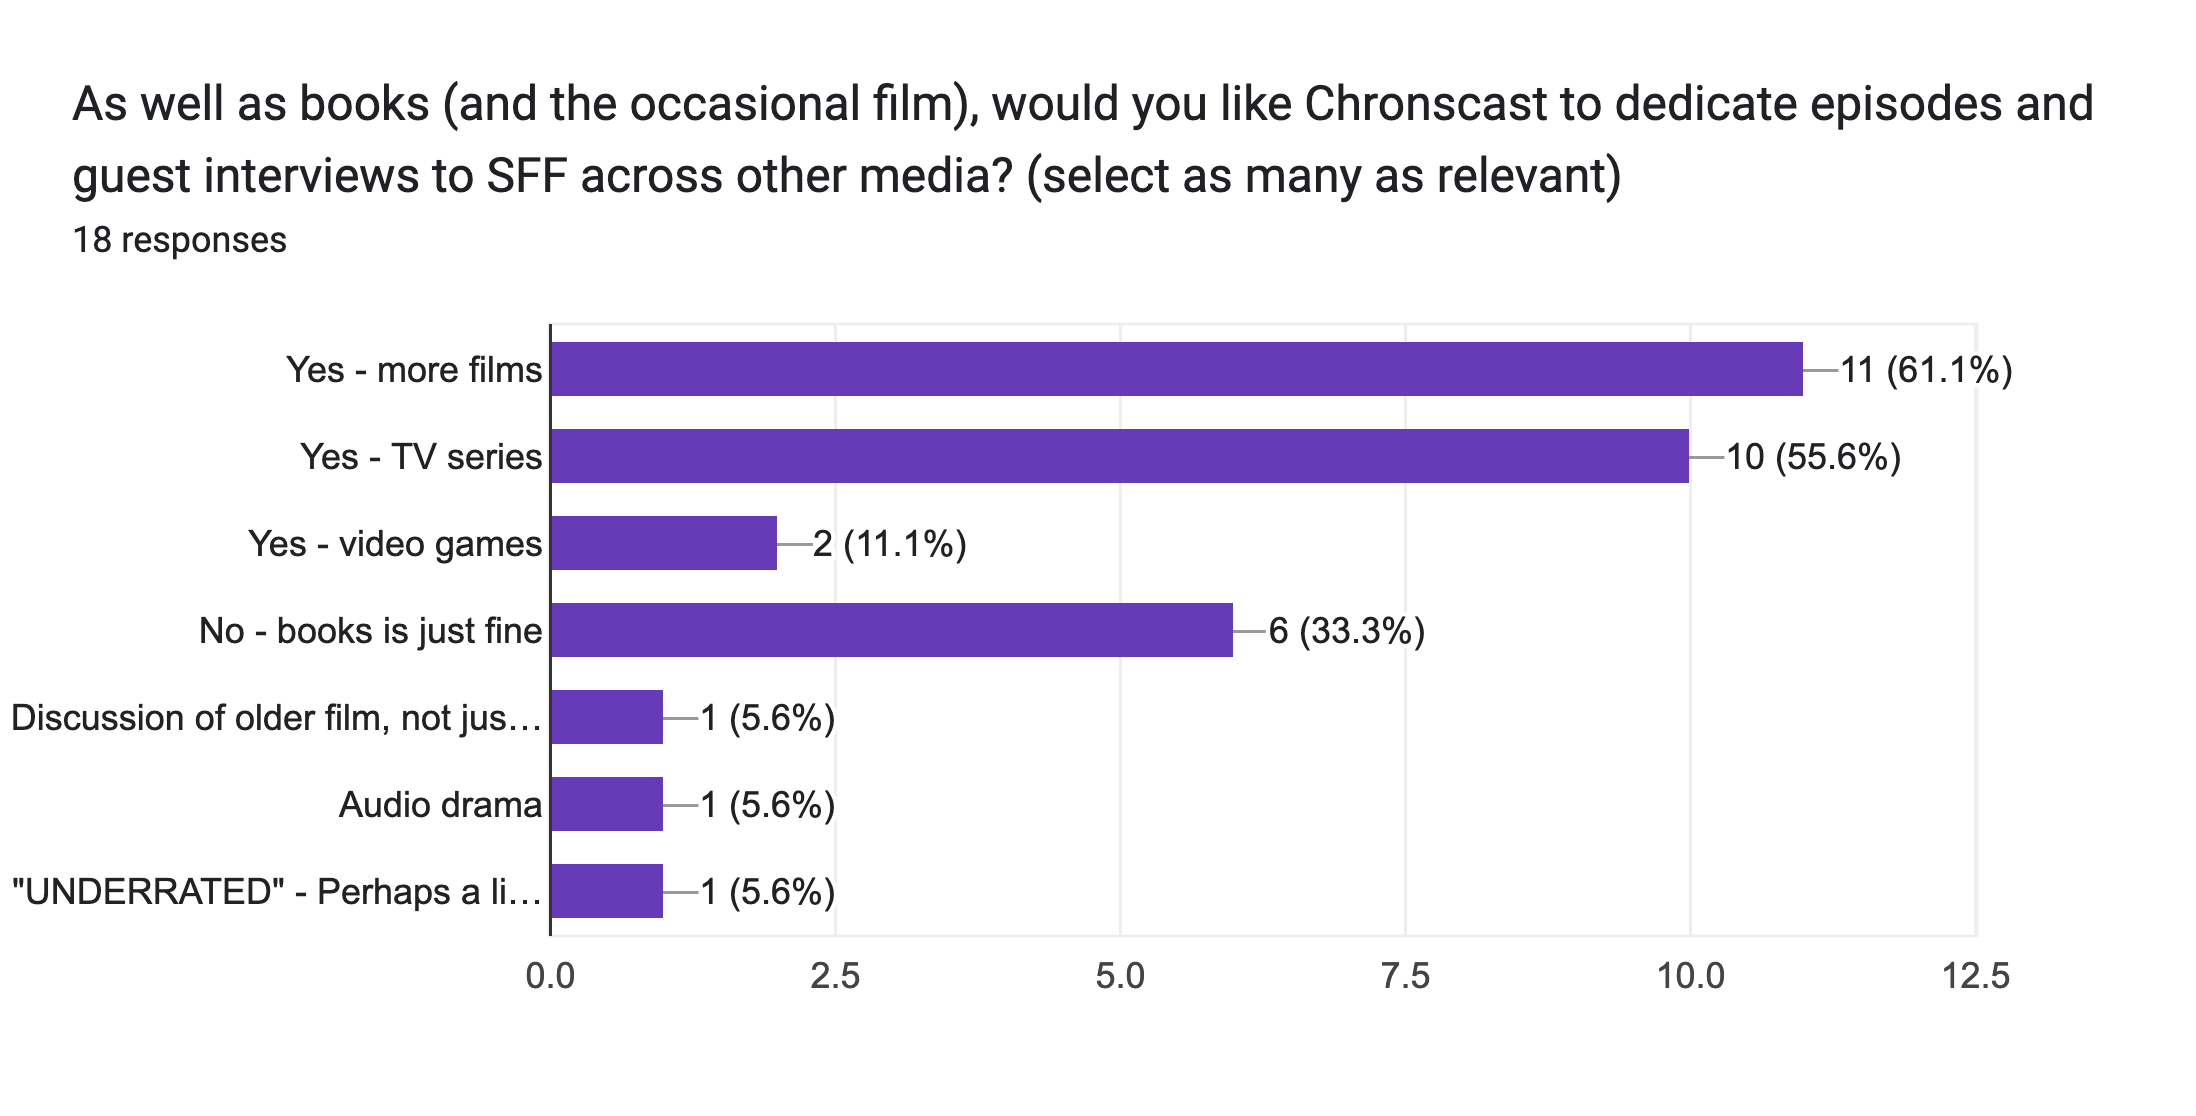 Forms response chart. Question title: As well as books (and the occasional film), would you like Chronscast to dedicate episodes and guest interviews to SFF across other media? (select as many as relevant). Number of responses: 18 responses.